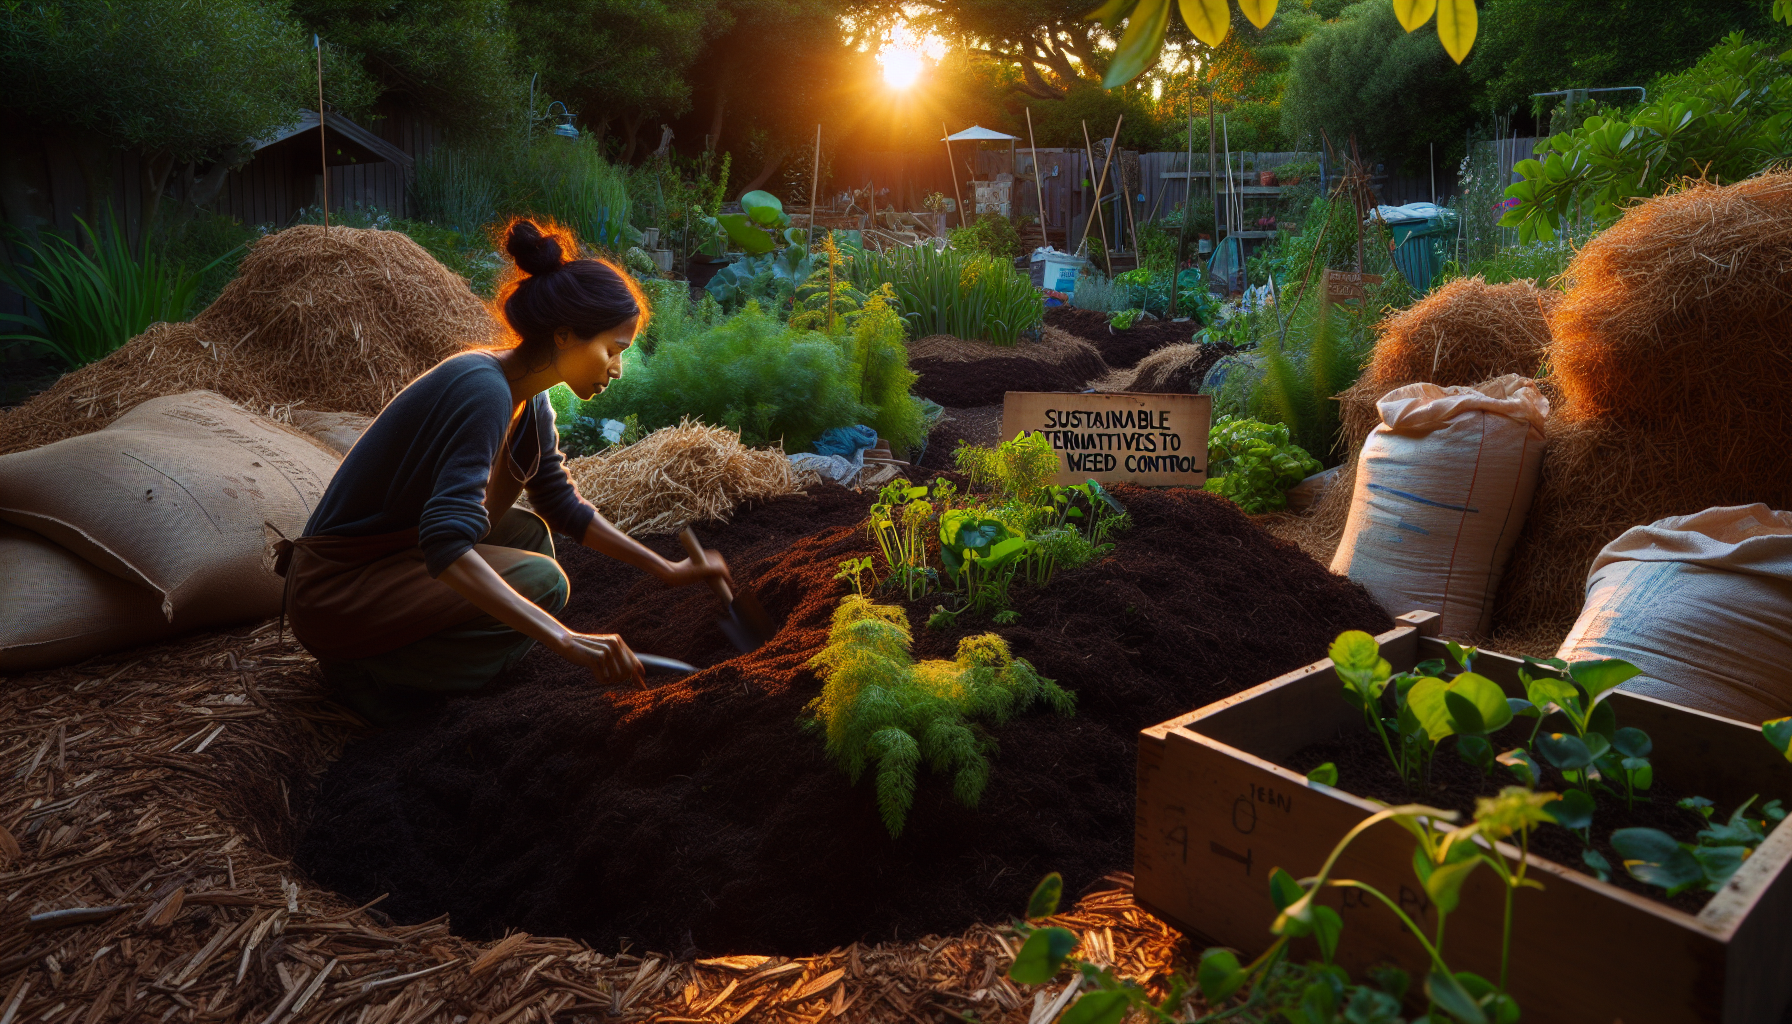 Transforming weed control: exploring sustainable alternatives to plastic sheeting in gardening